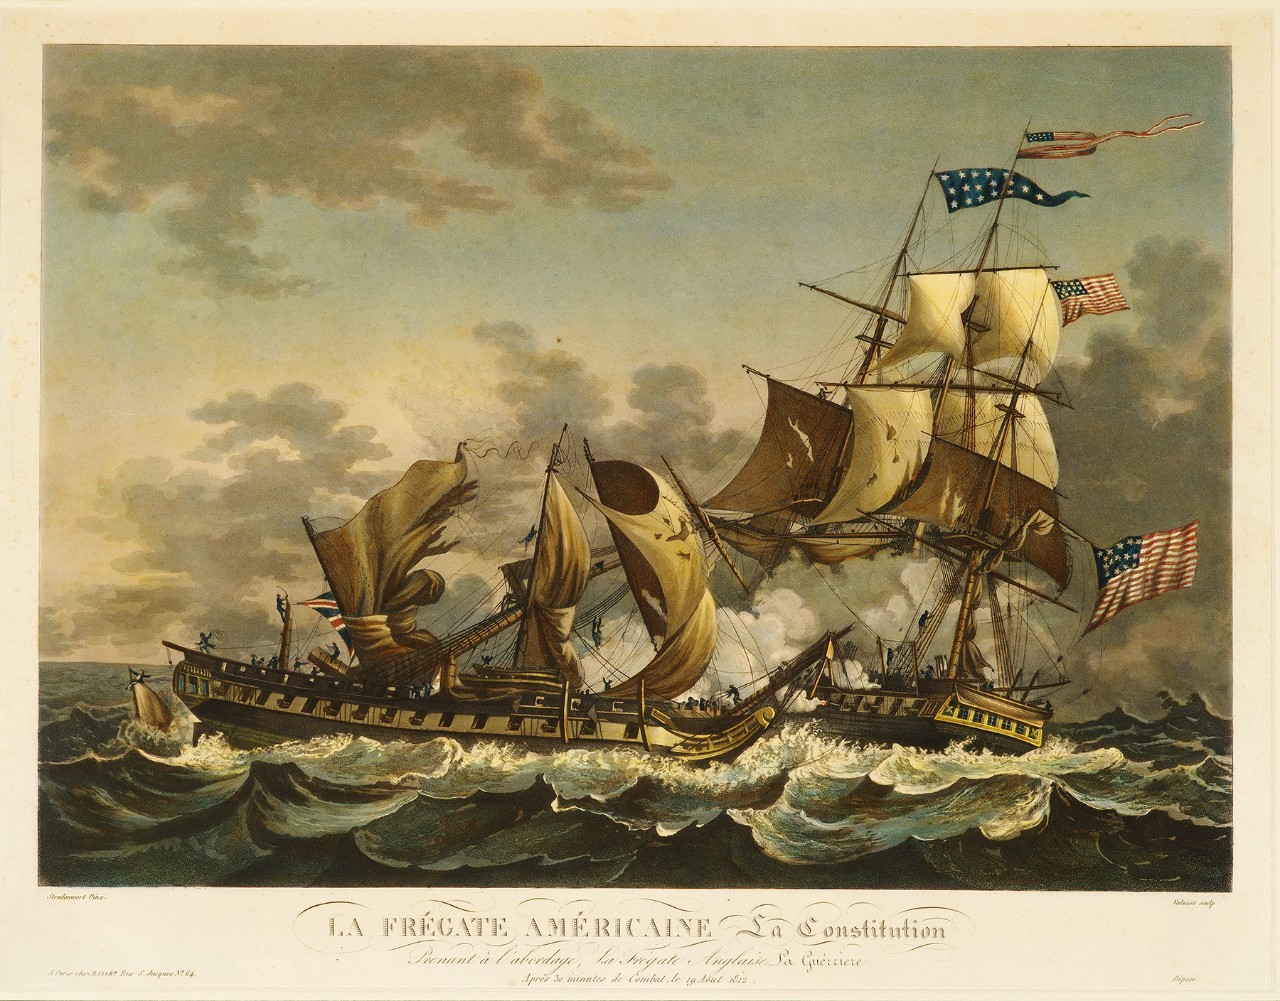 In heavy seas a battle between Guerriere on the left with heavy damage to its masts. Constitution is on the right firing into Guerriere